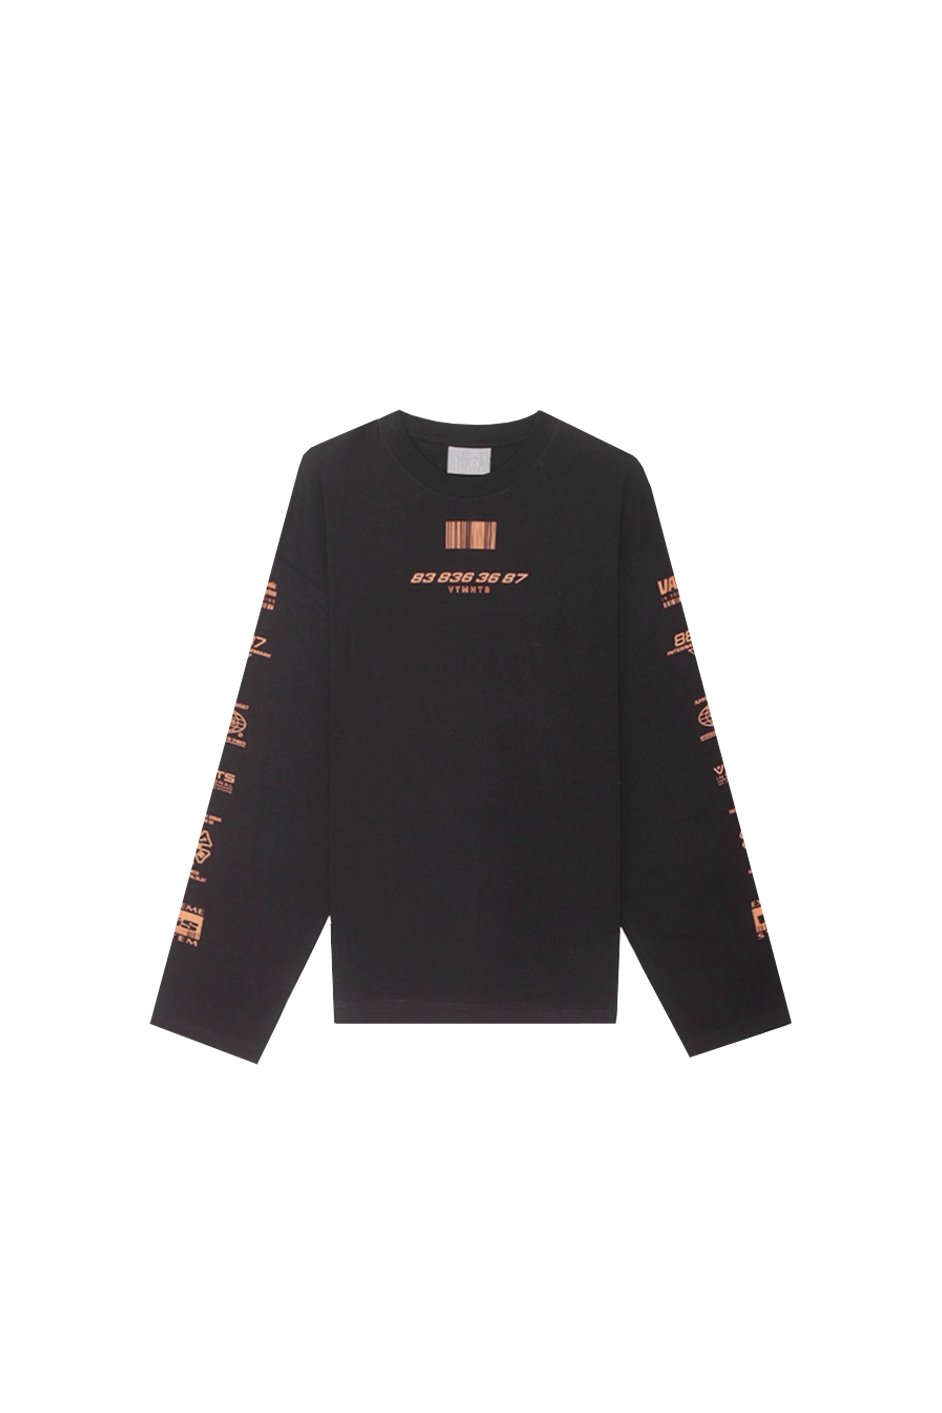 ALL RIGHTS RESERVED LONGSLEEVE